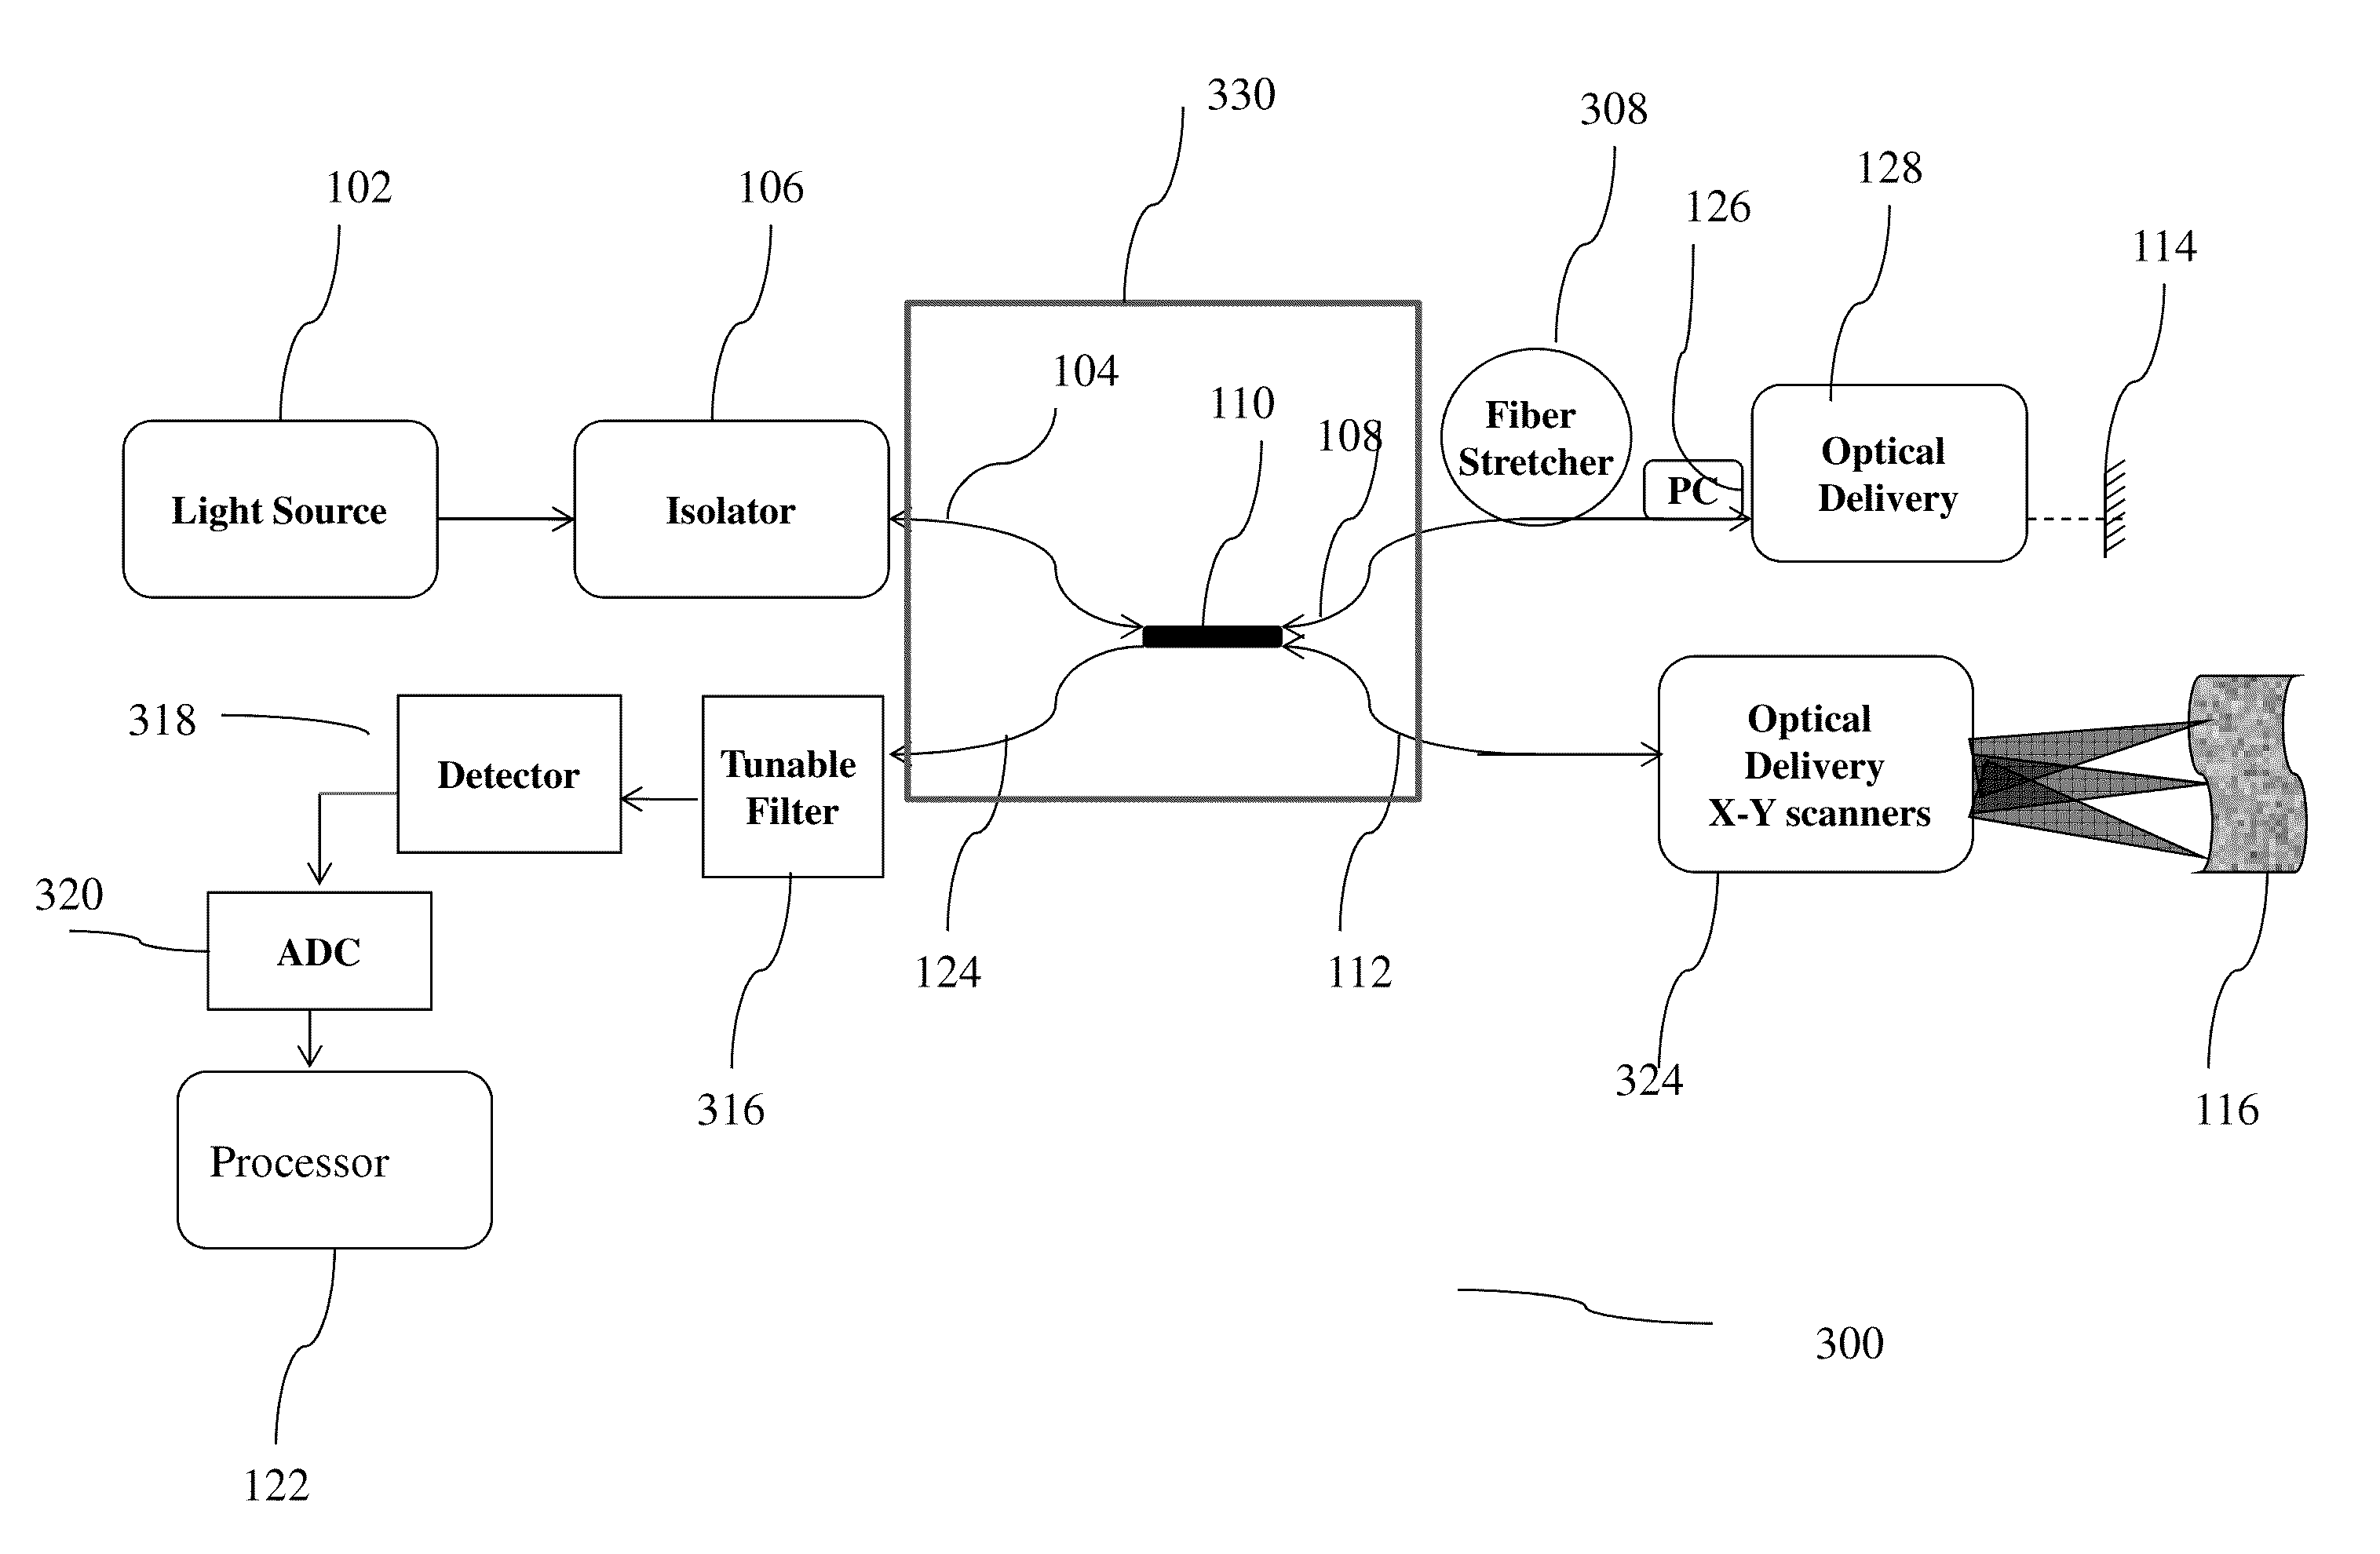 Method and System for Compact Optical Coherence Tomography